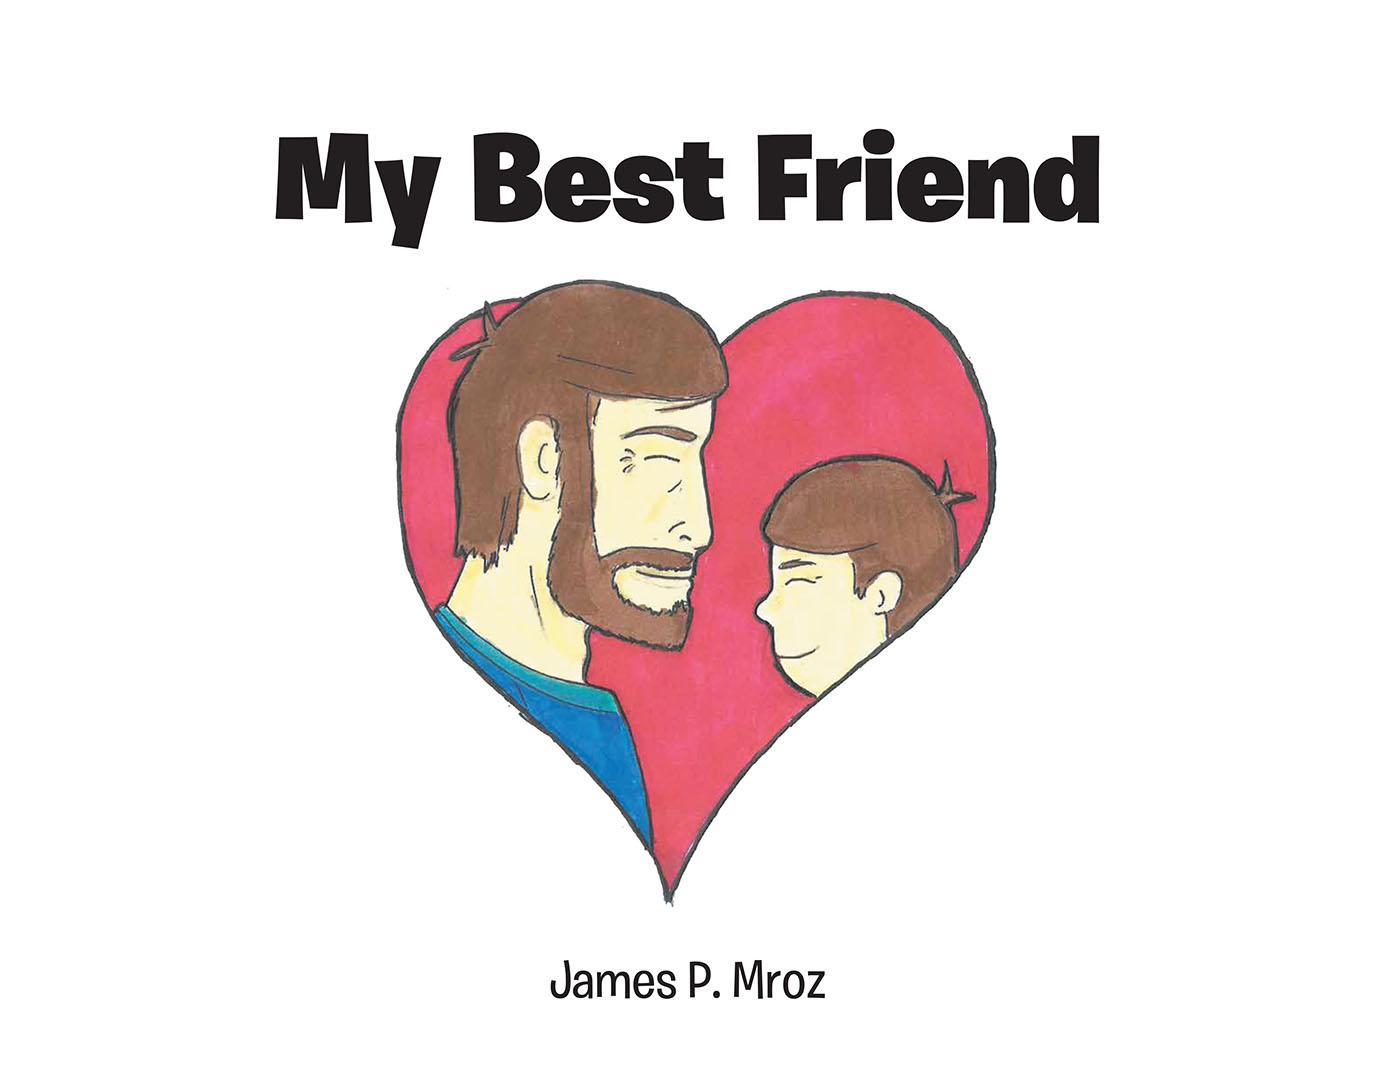 Author James P. Mroz’s Newly Released "My Best Friend" Reveals the Special Bond a Parent and Child Share, Inspired by the Author and His Own Children and Grandchildren